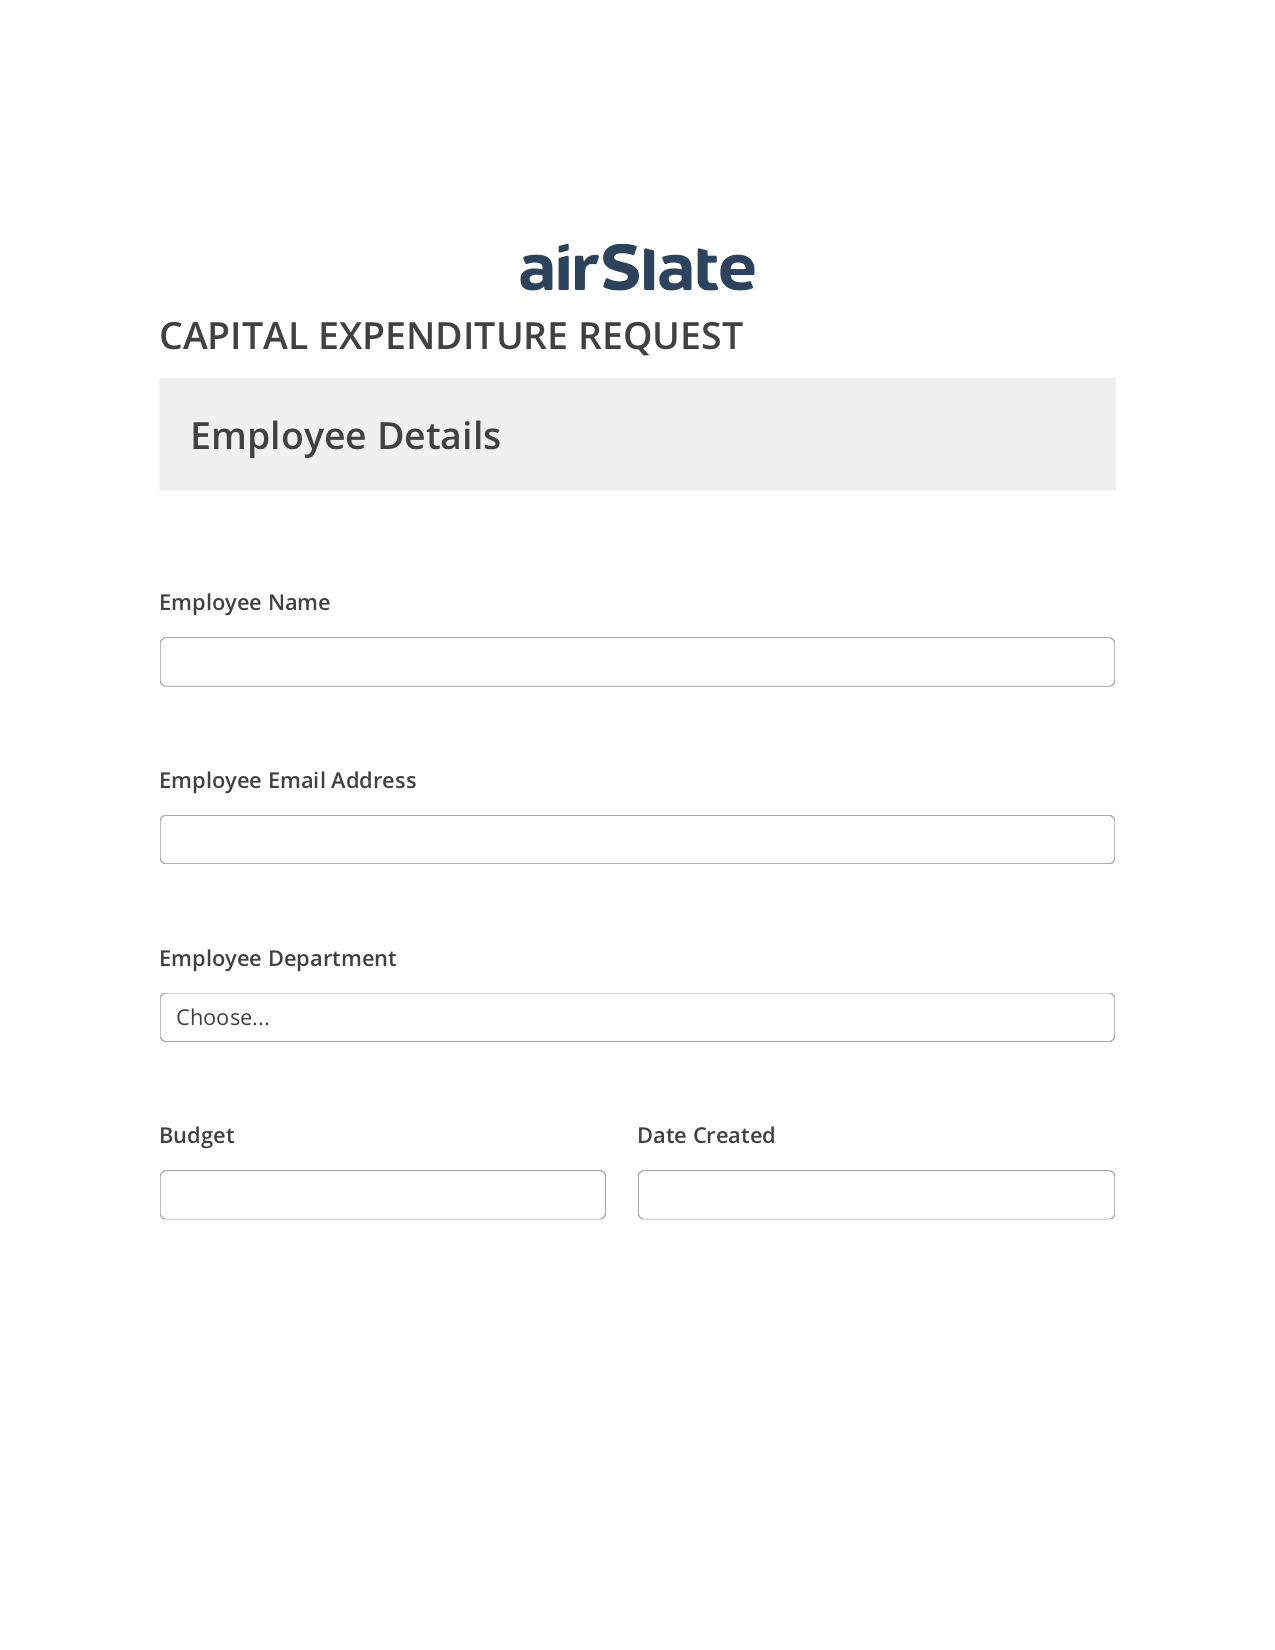 Capital Expenditure Request Approval Workflow Pre-fill from another Slate Bot, Add Tags to Slate Bot, Archive to Dropbox Bot